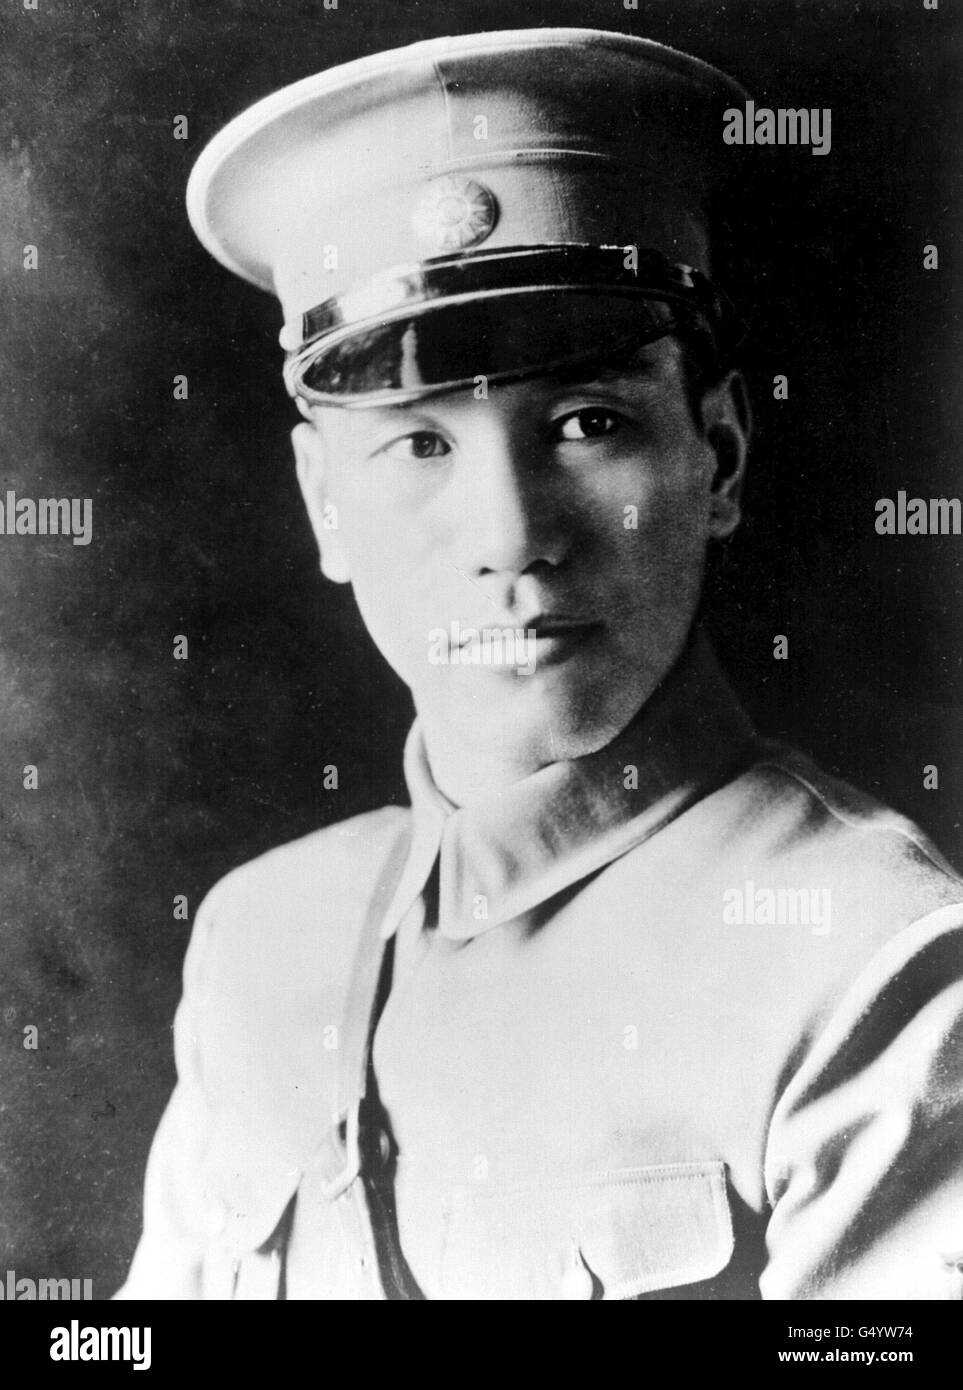 General Chiang Kai-Shek (1887-1975) Chairman of the Kuomintang, President of the Republic of China, Commander-in-Chief of the Nationalist Army and 1st Group Army. Stock Photo